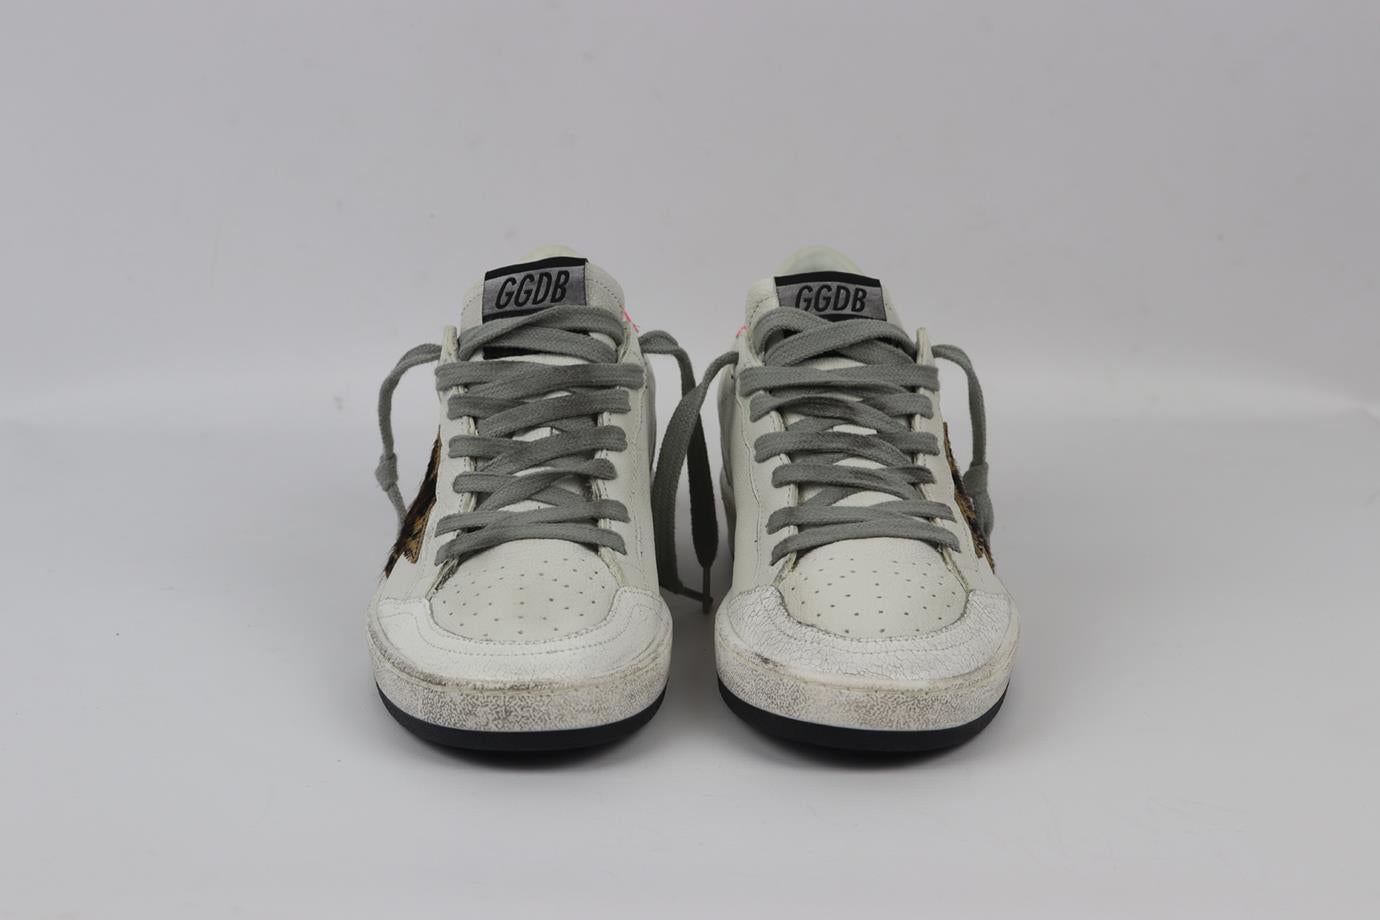 Golden Goose Deluxe Brand Ballstar Calf Hair And Leather Sneakers Eu 38 Uk 5 Us  In Excellent Condition In London, GB